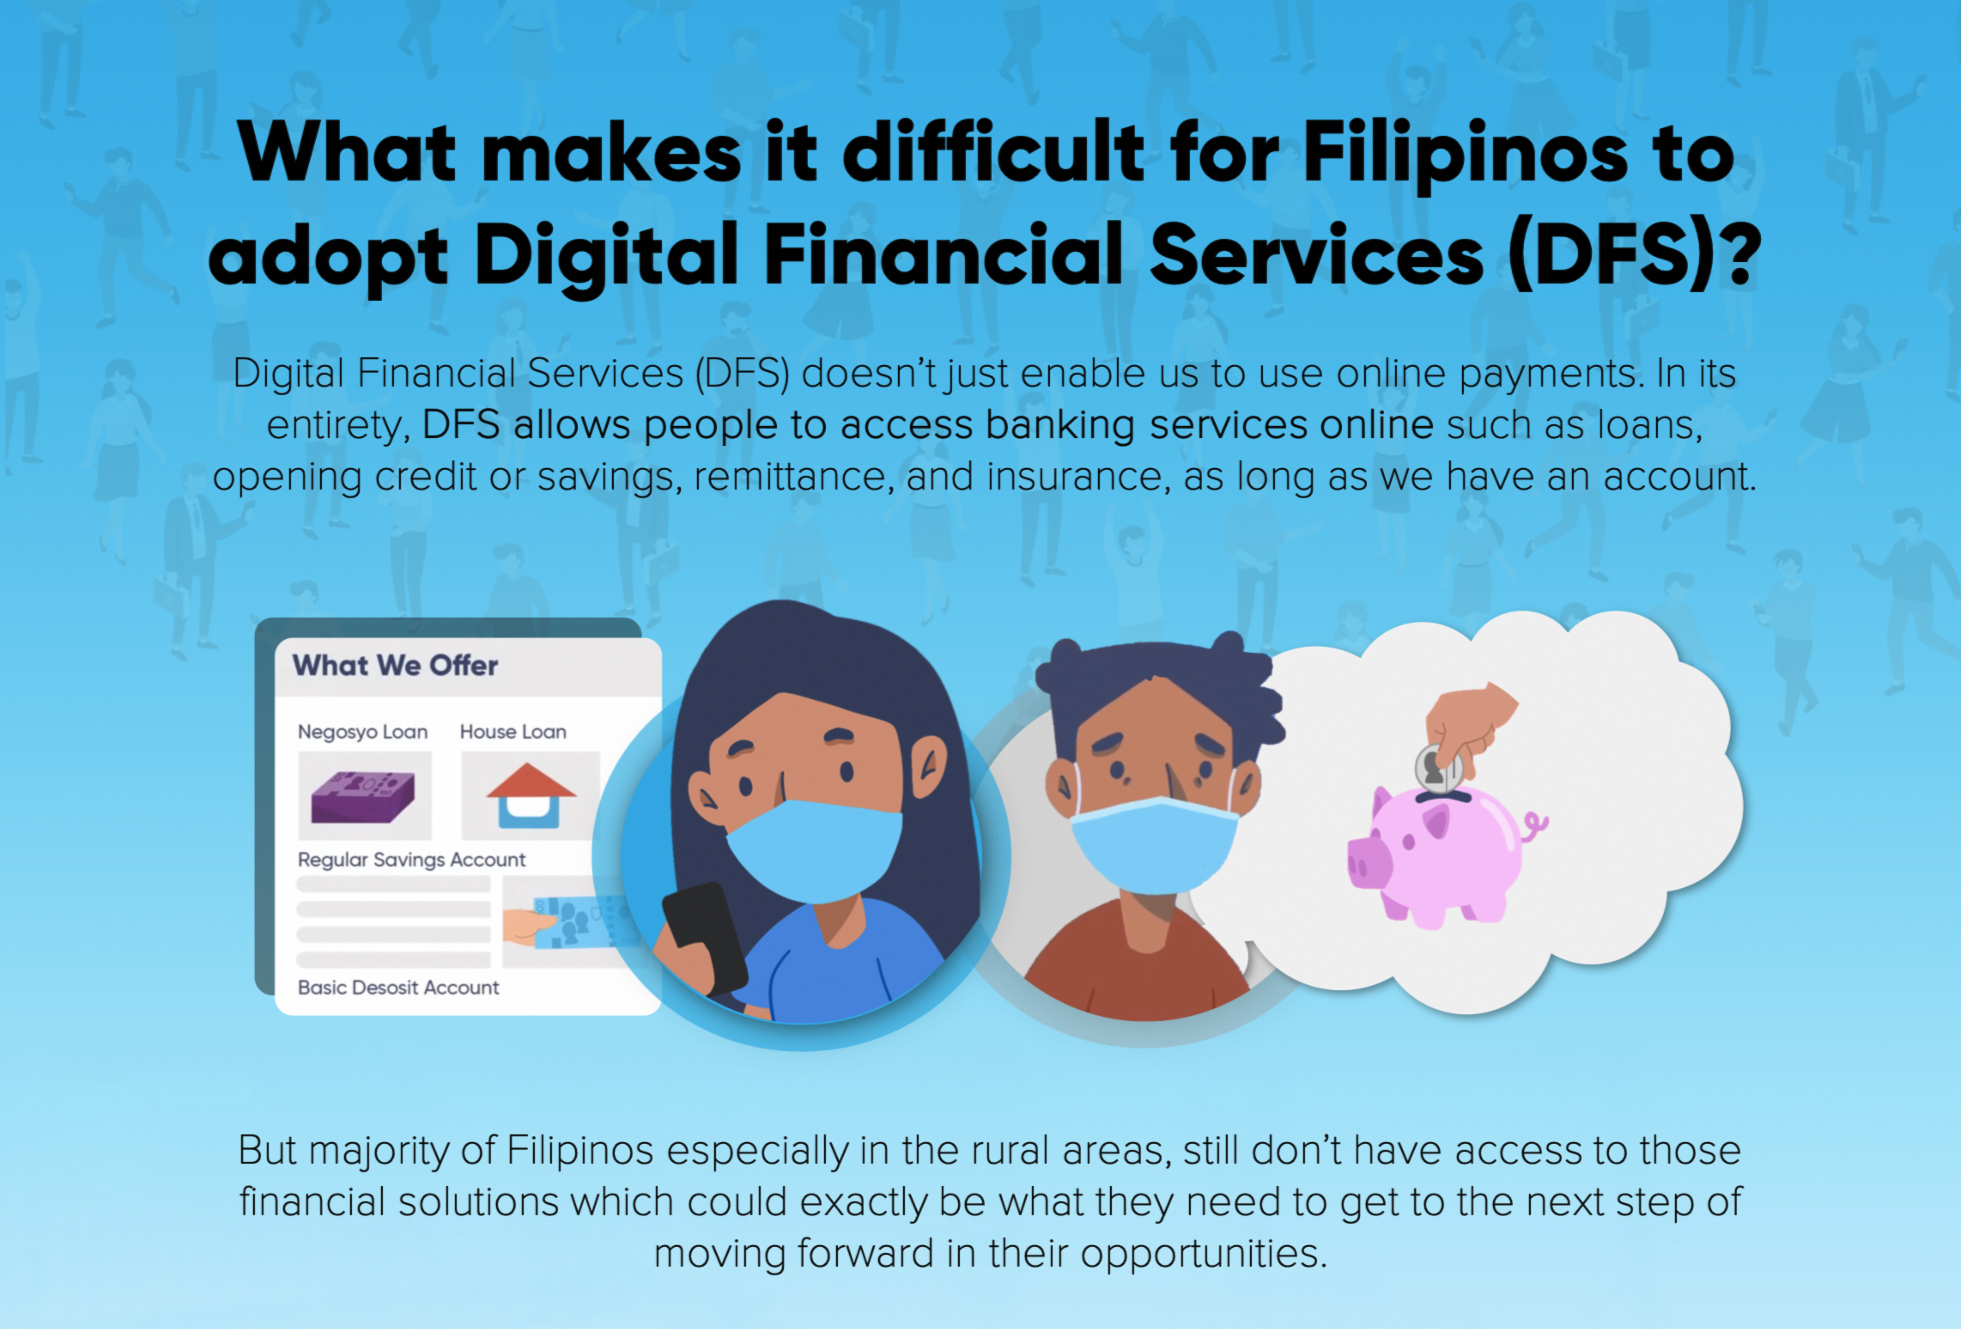 What makes difficult for Filipinos to use DFS